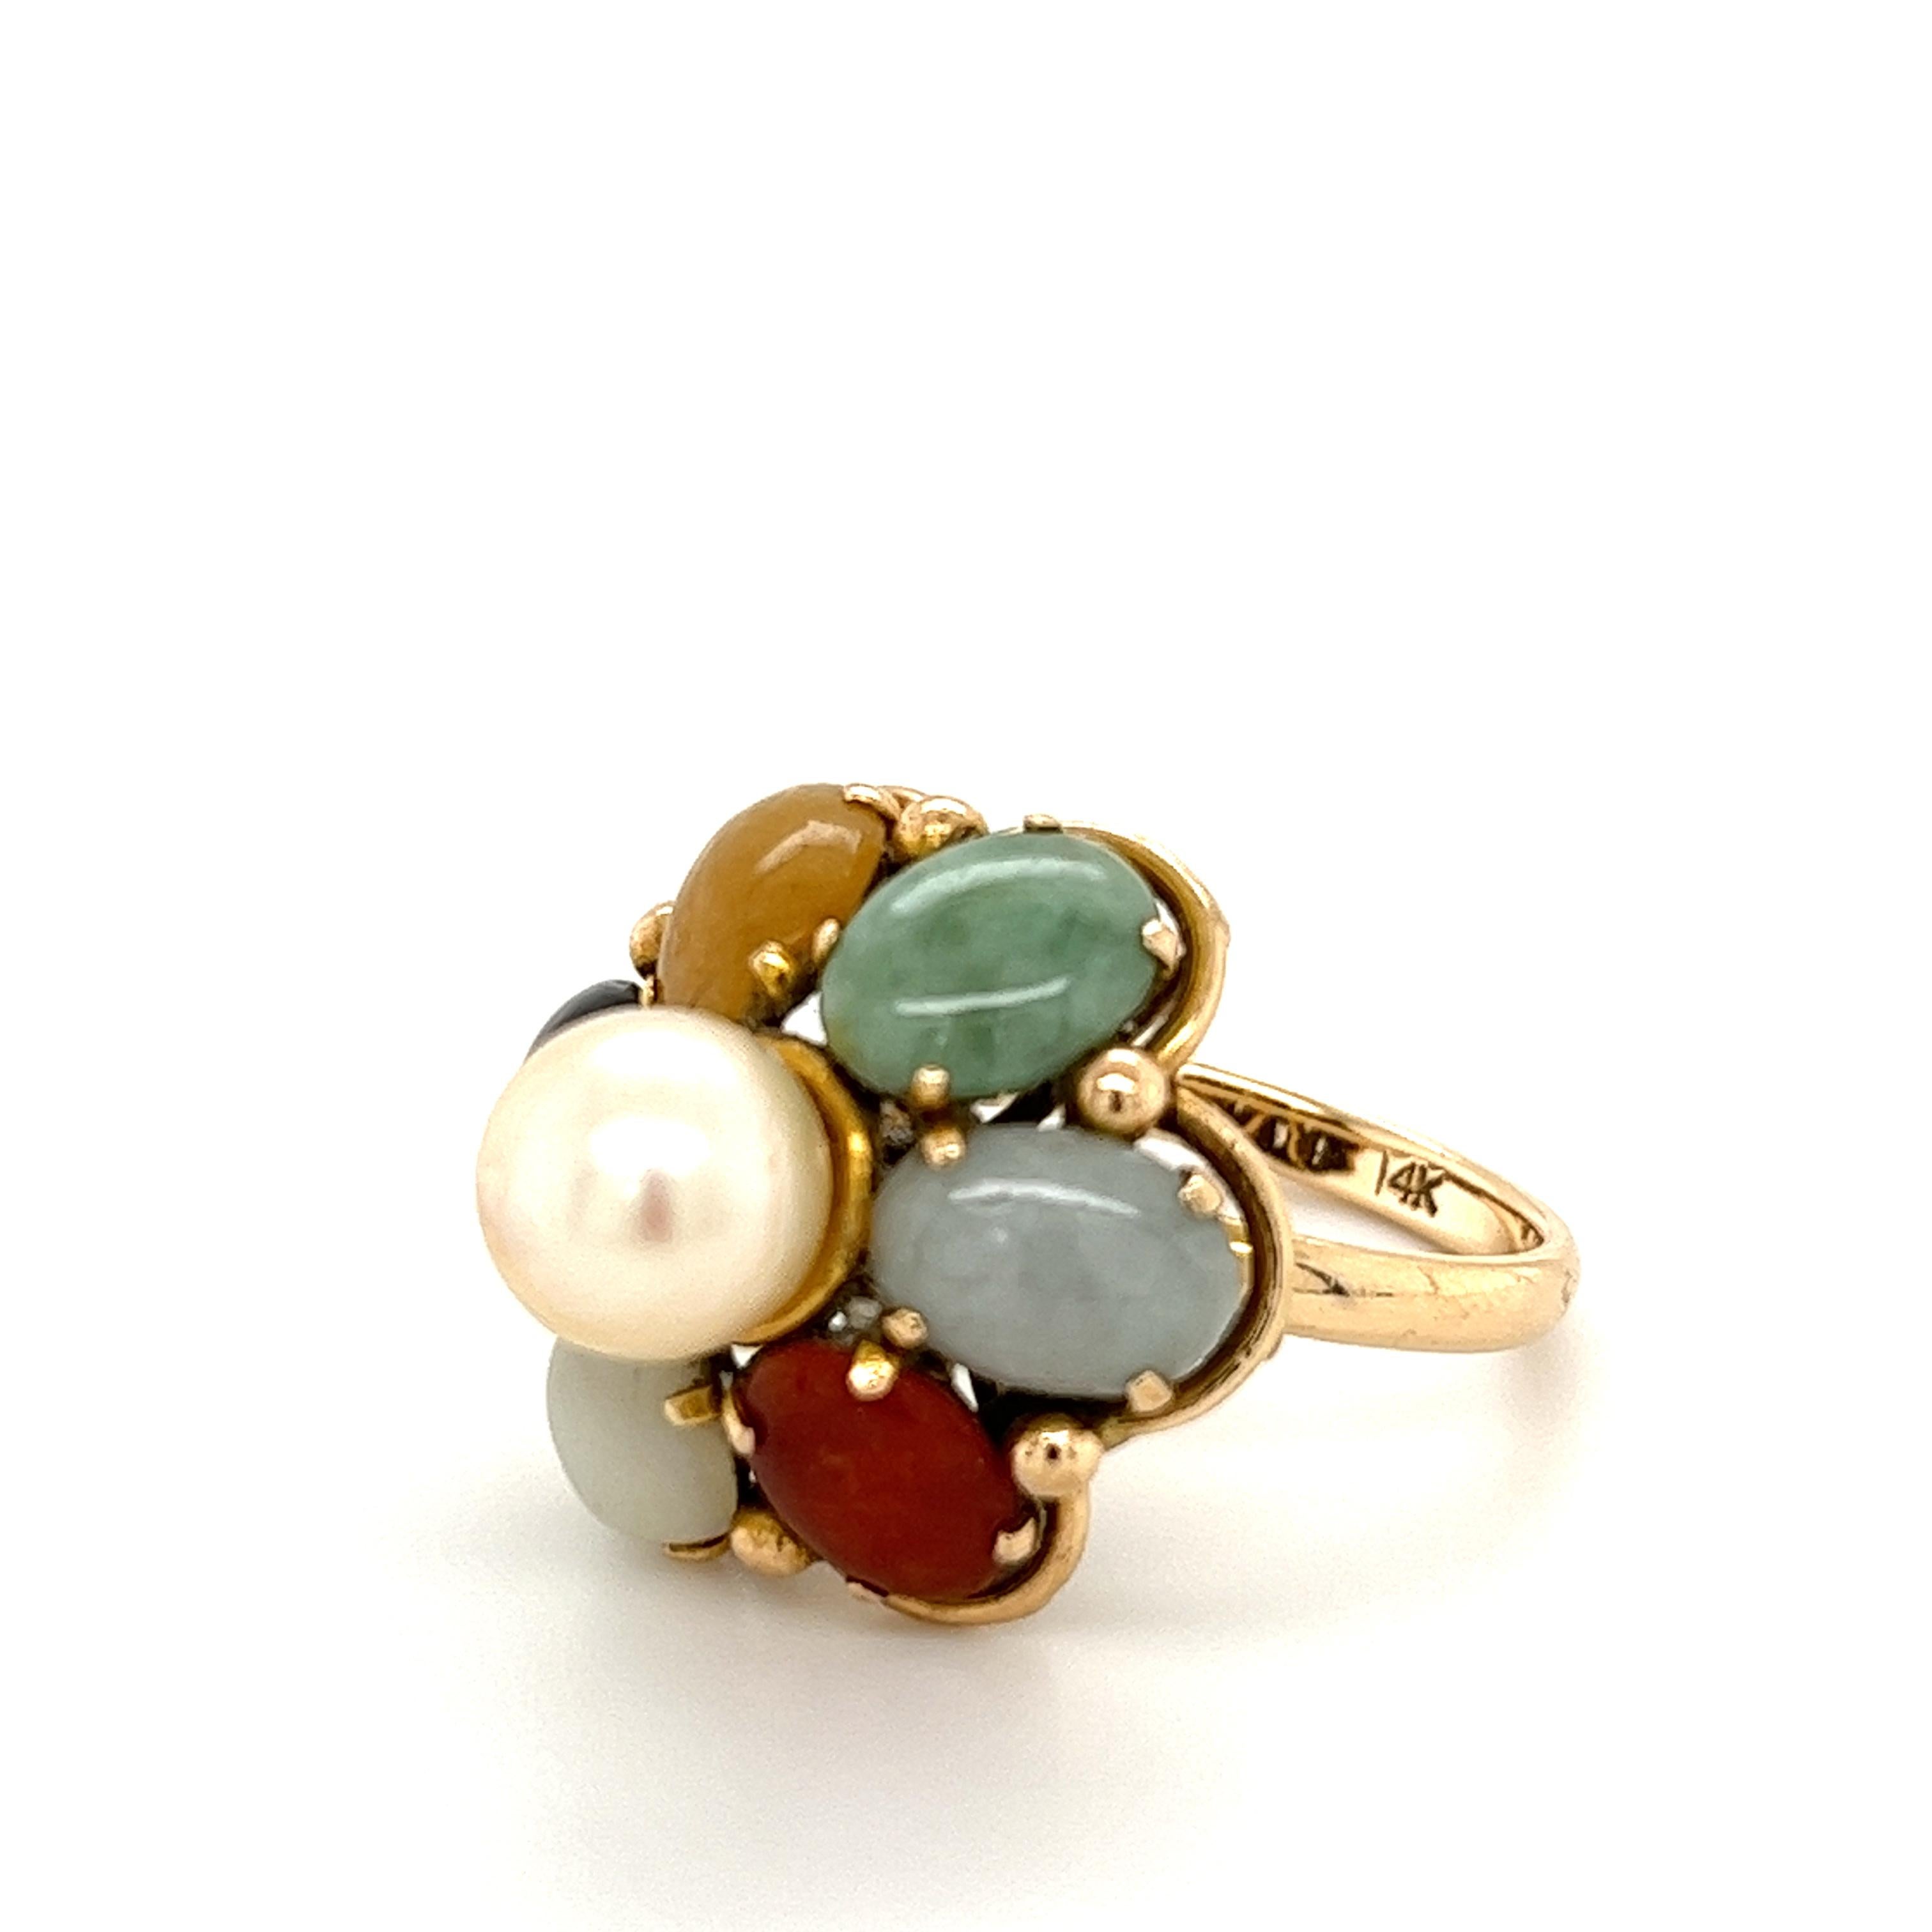 Multi-gemstone cluster style flower ring in 14k solid yellow gold. Featuring a lustrous pearl center stone, and is accompanied by coral, onyx, opal, and jade. This vintage ring was handmade in a gorgeous flower-style setting with different gemstones